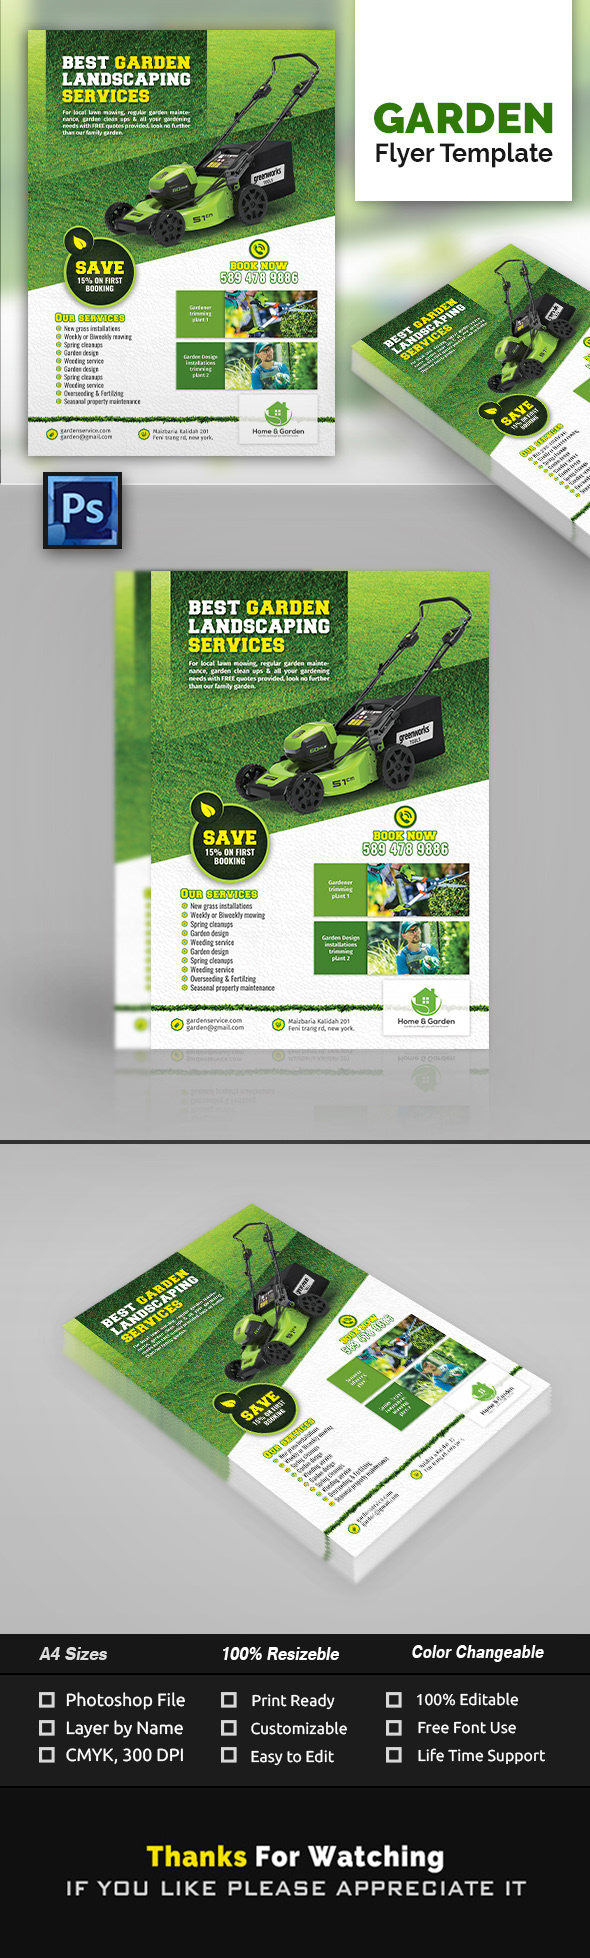 Garden Landscape Flyer Template on Behance With Regard To Landscaping Flyer Templates